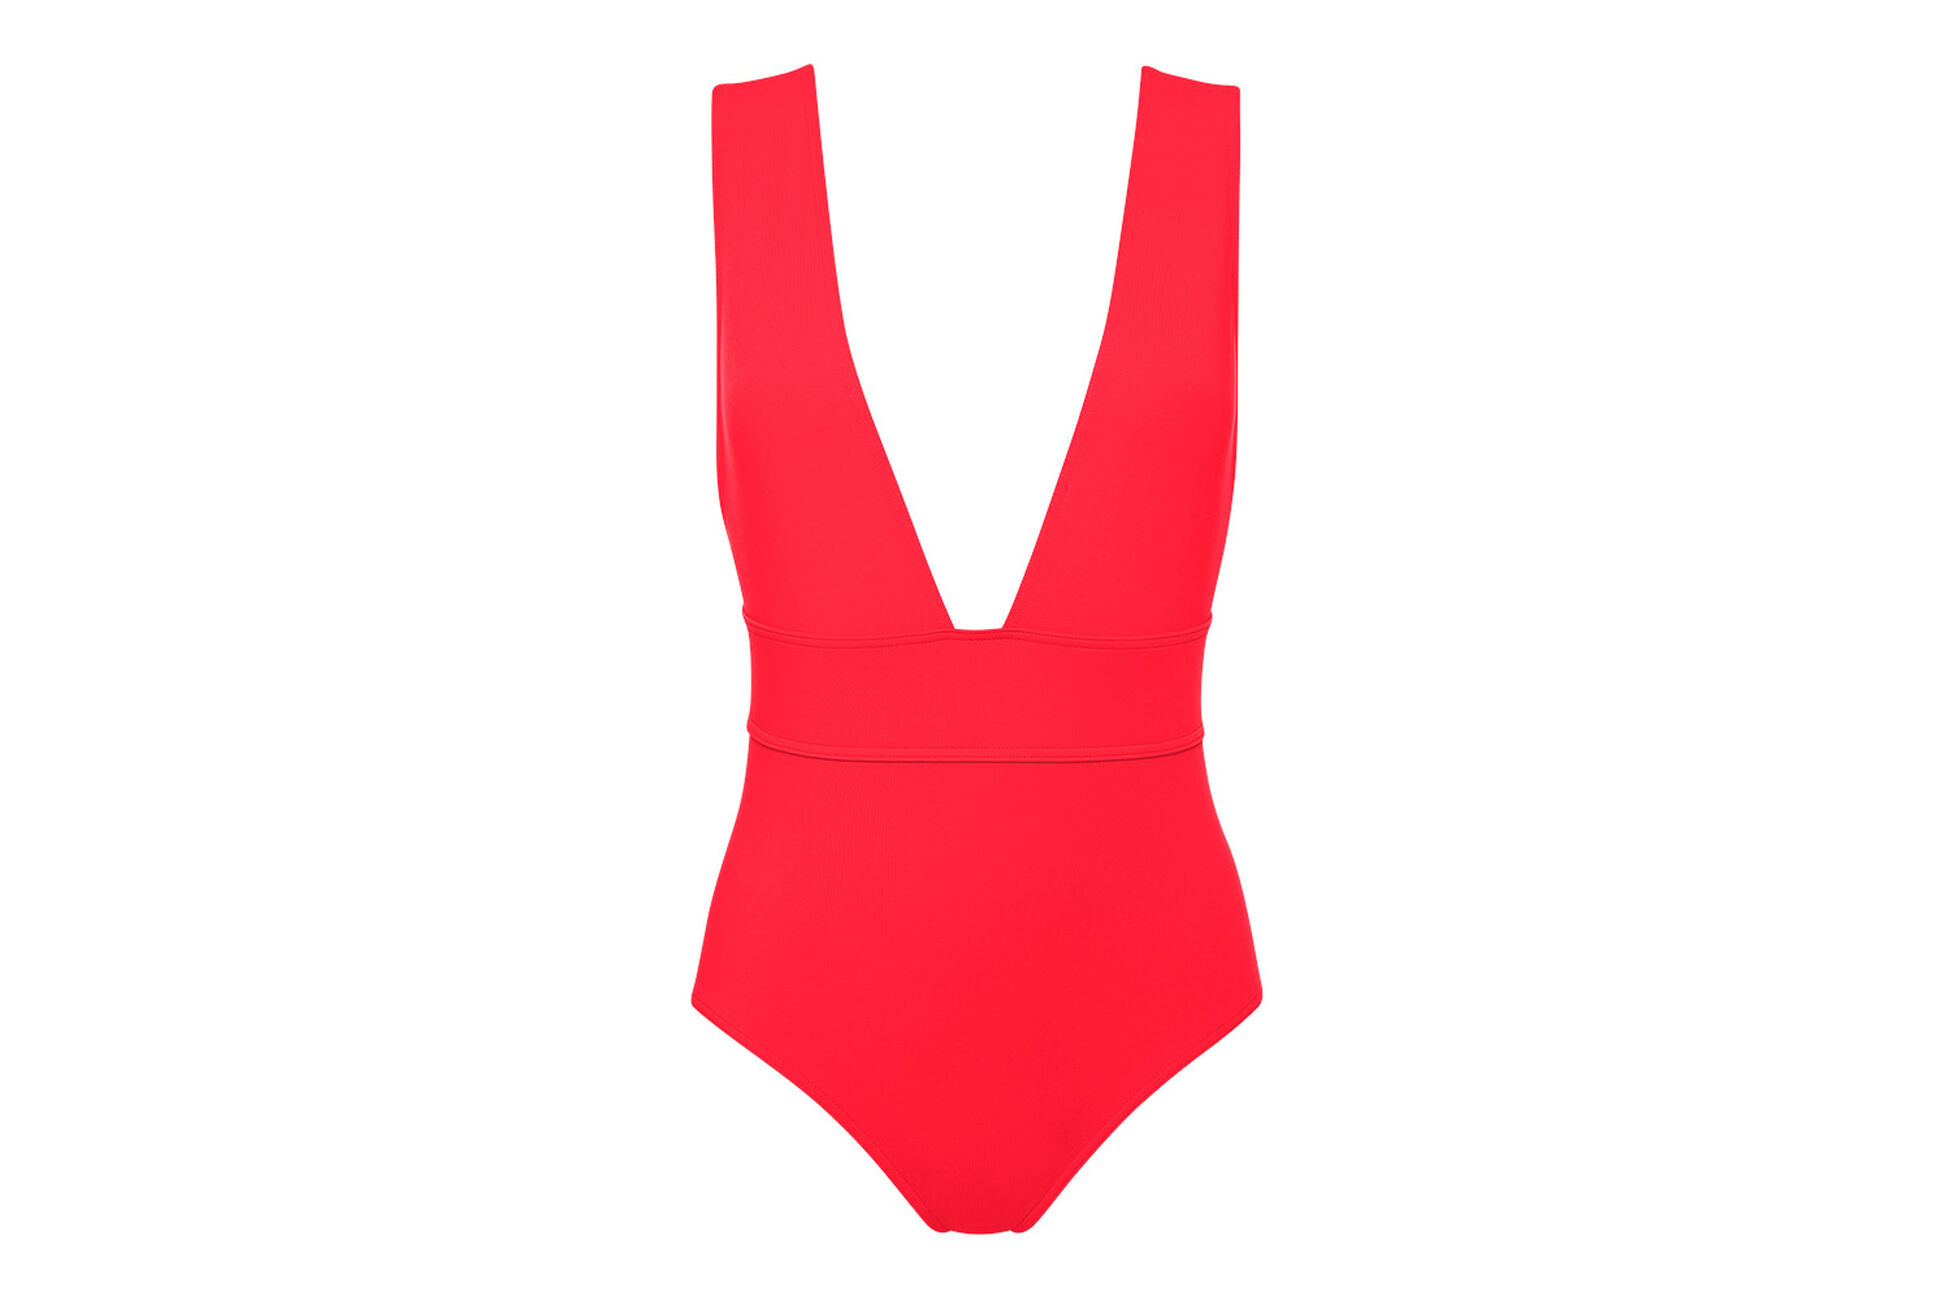 Pigment Sophisticated one-piece standard view �